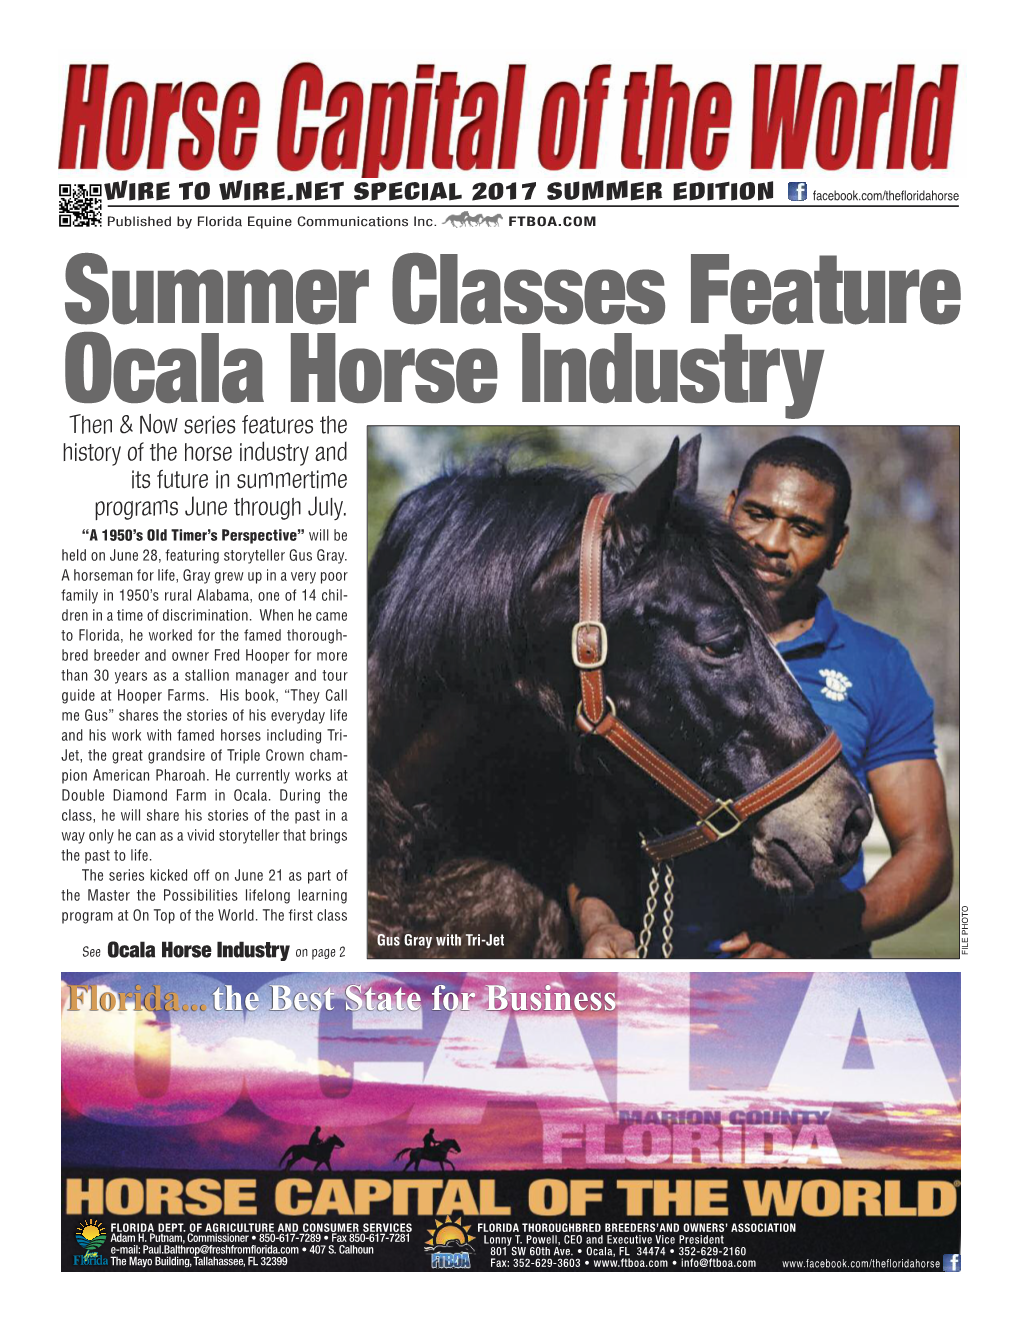 Summer Classes Feature Ocala Horse Industry Then & Now Series Features the History of the Horse Industry and Its Future in Summertime Programs June Through July